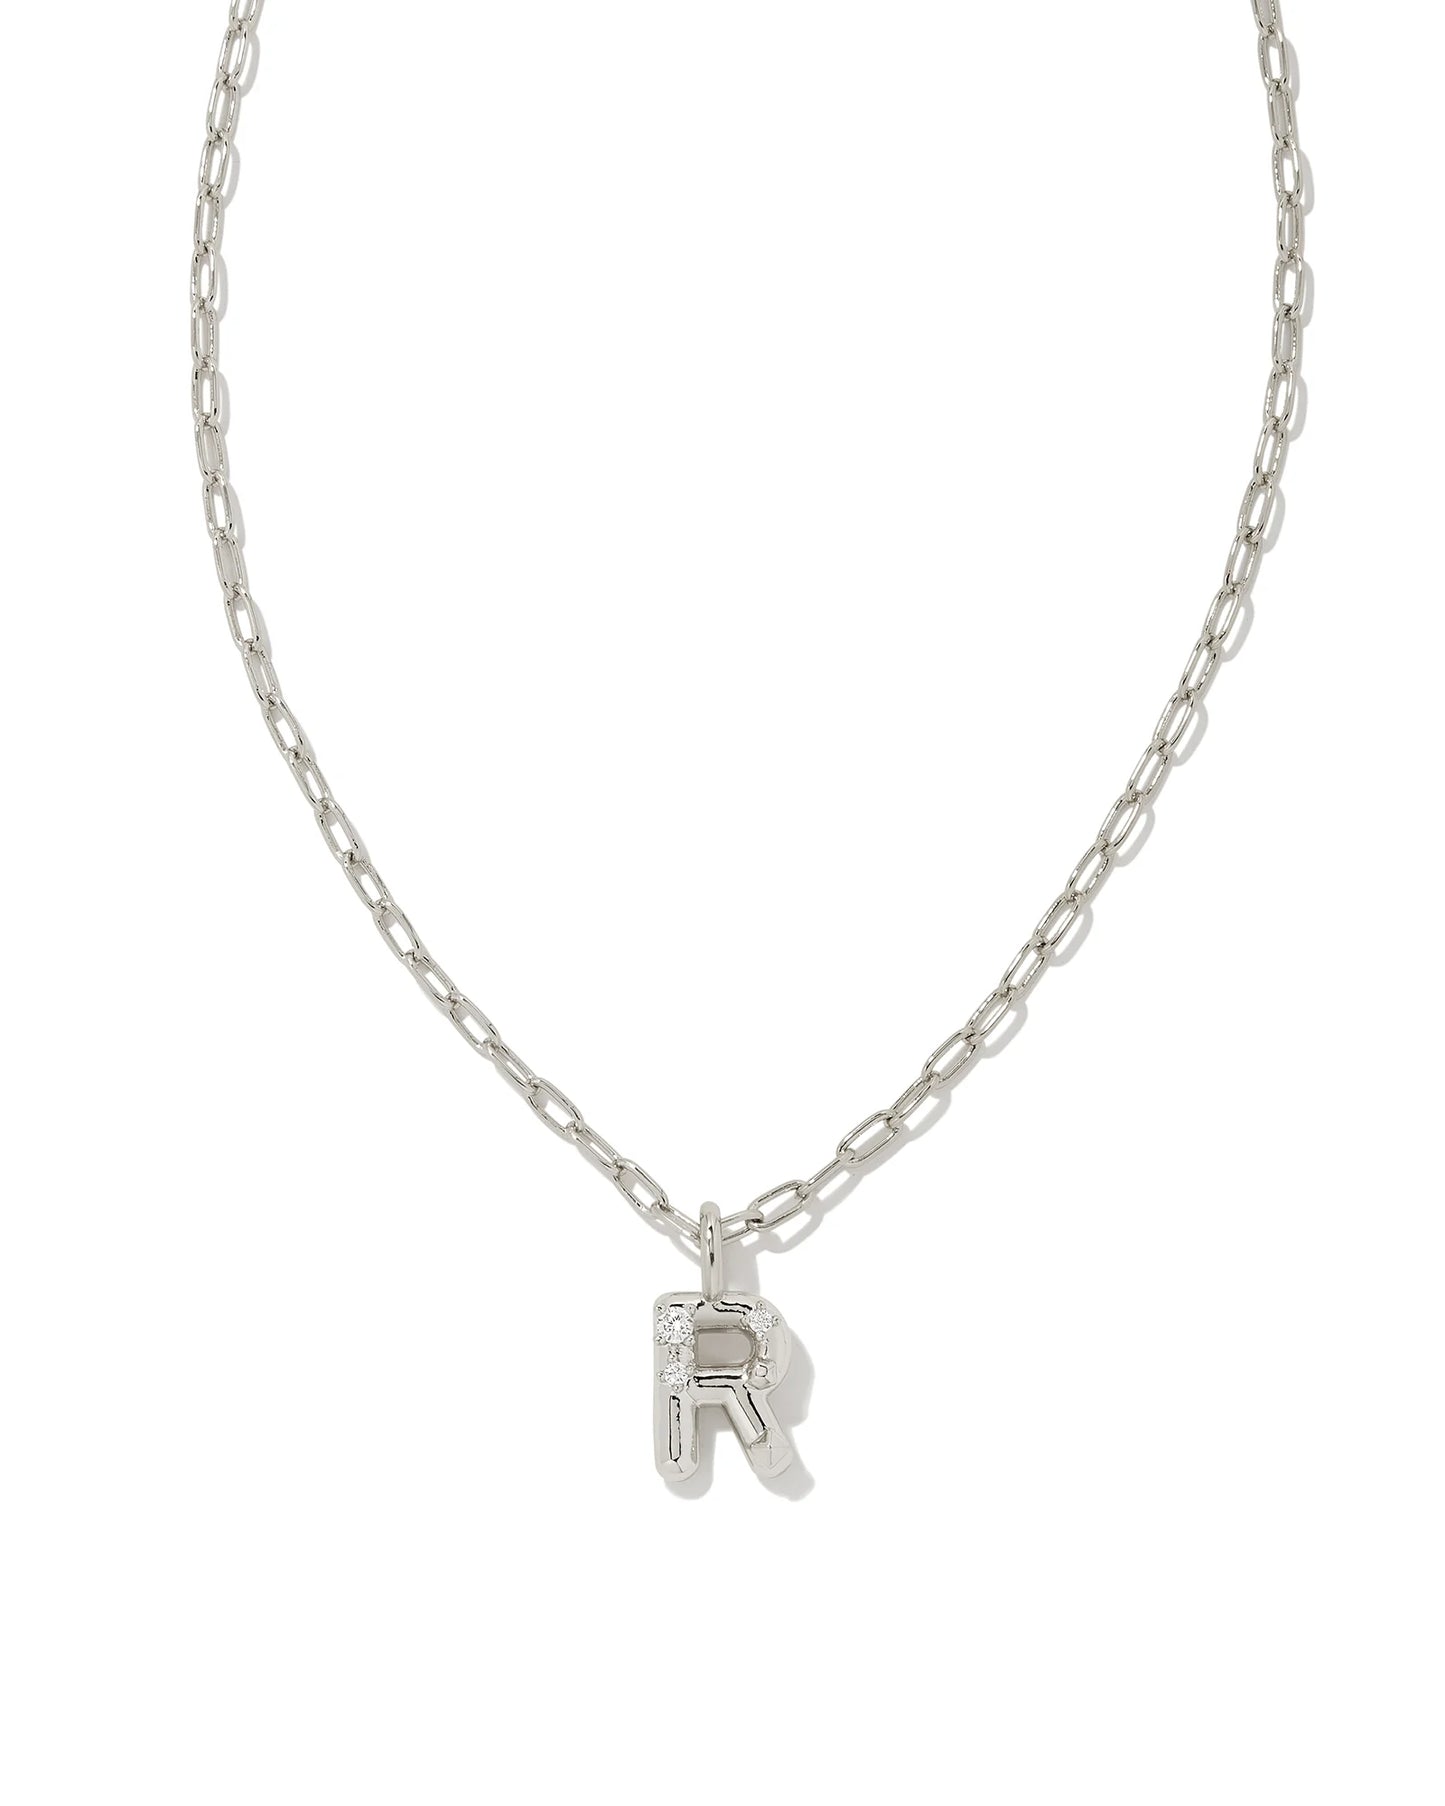 Crystal Letters Silver Short Pendant Necklaces in White Crystal